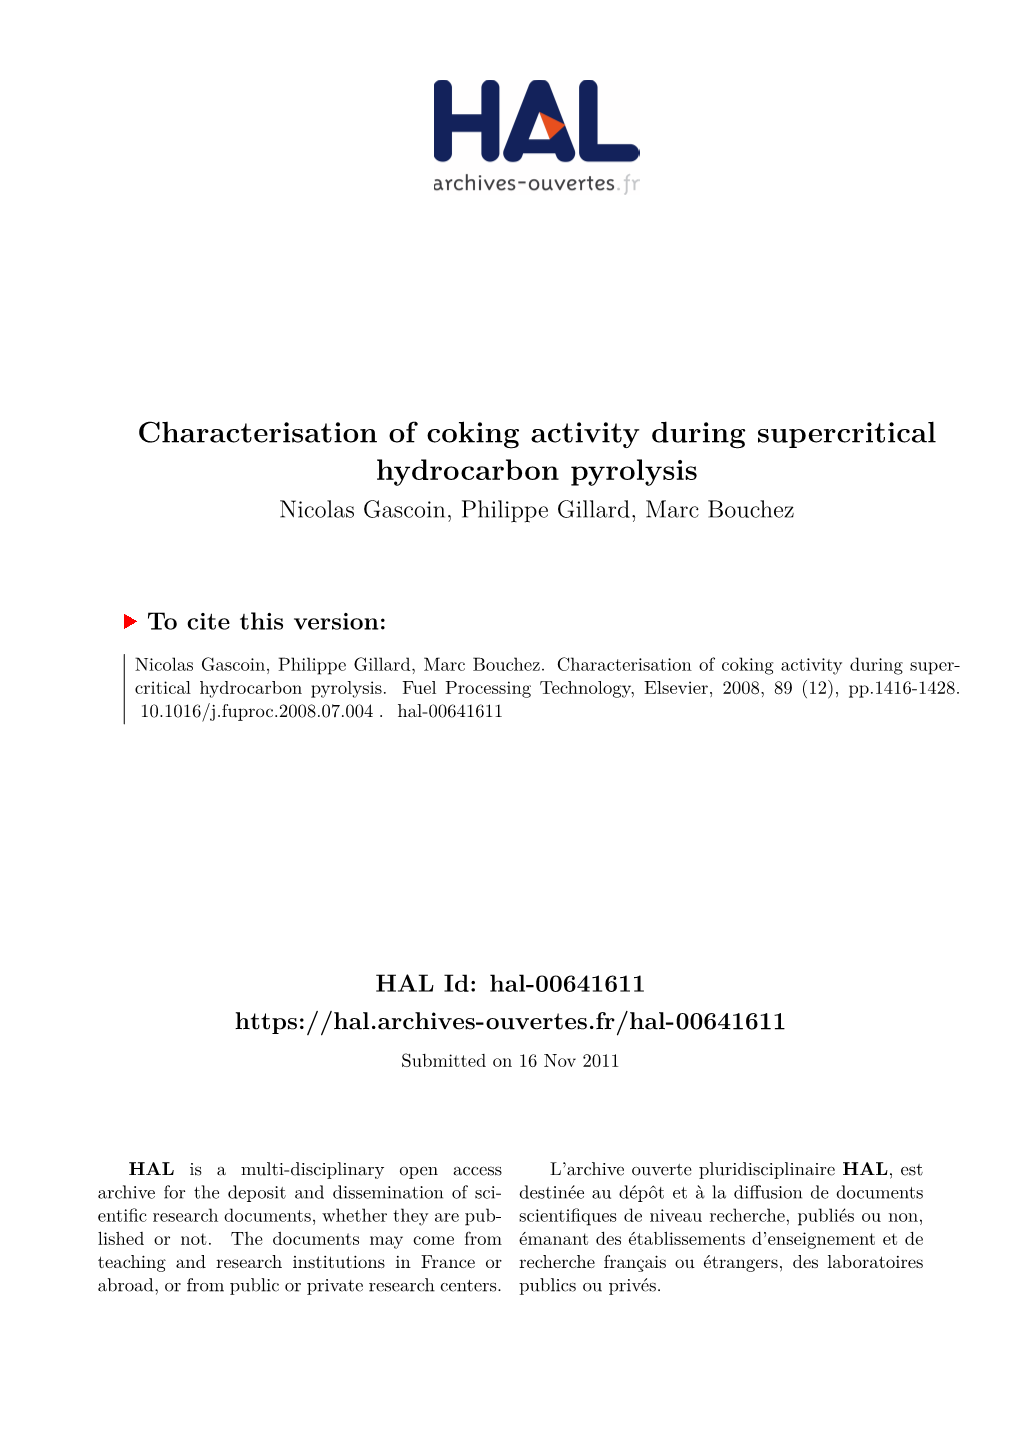 Characterisation of Coking Activity During Supercritical Hydrocarbon Pyrolysis Nicolas Gascoin, Philippe Gillard, Marc Bouchez